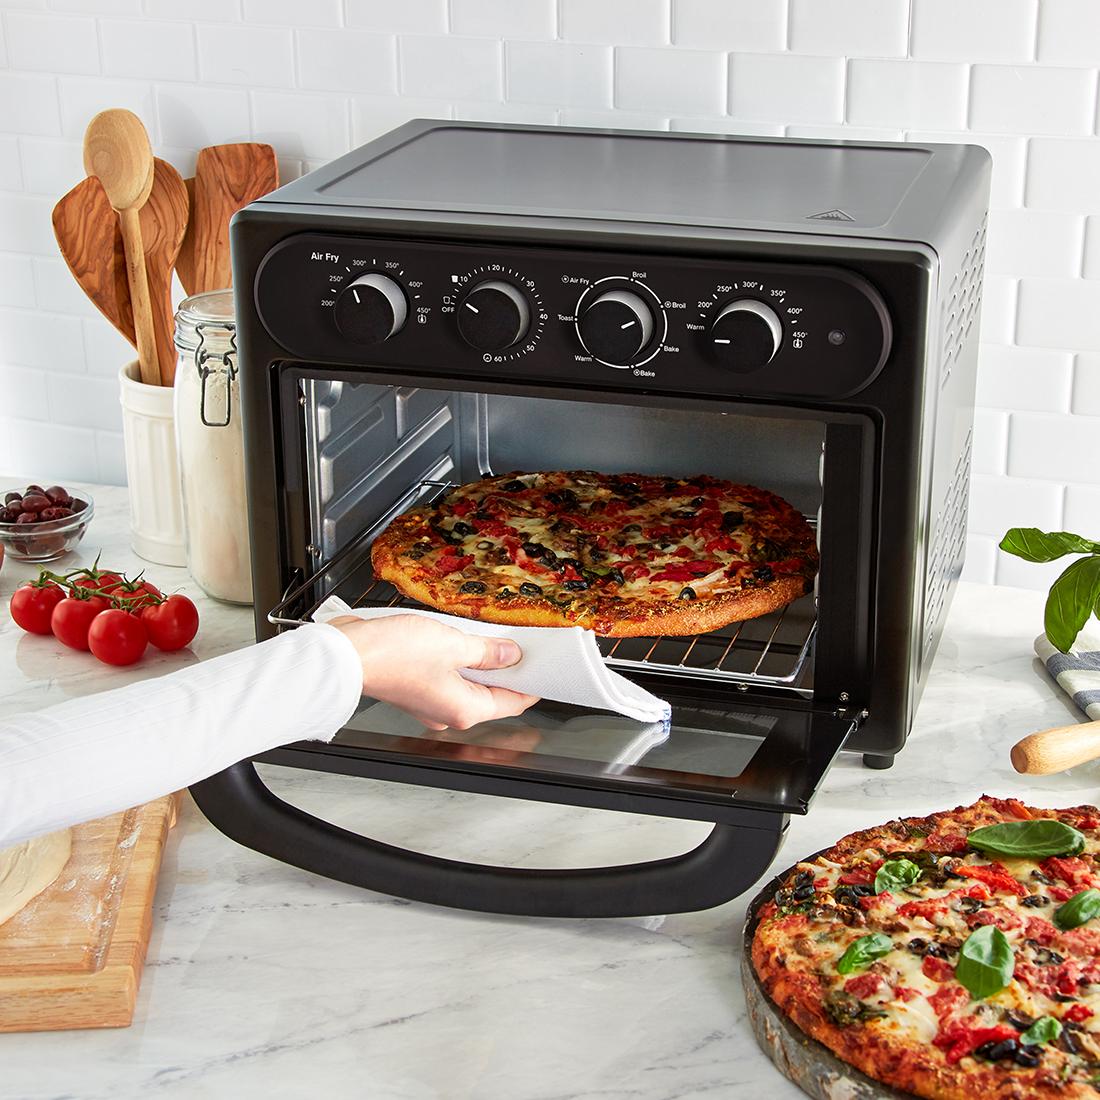 Cooking a pizza in an air fryer toaster oven